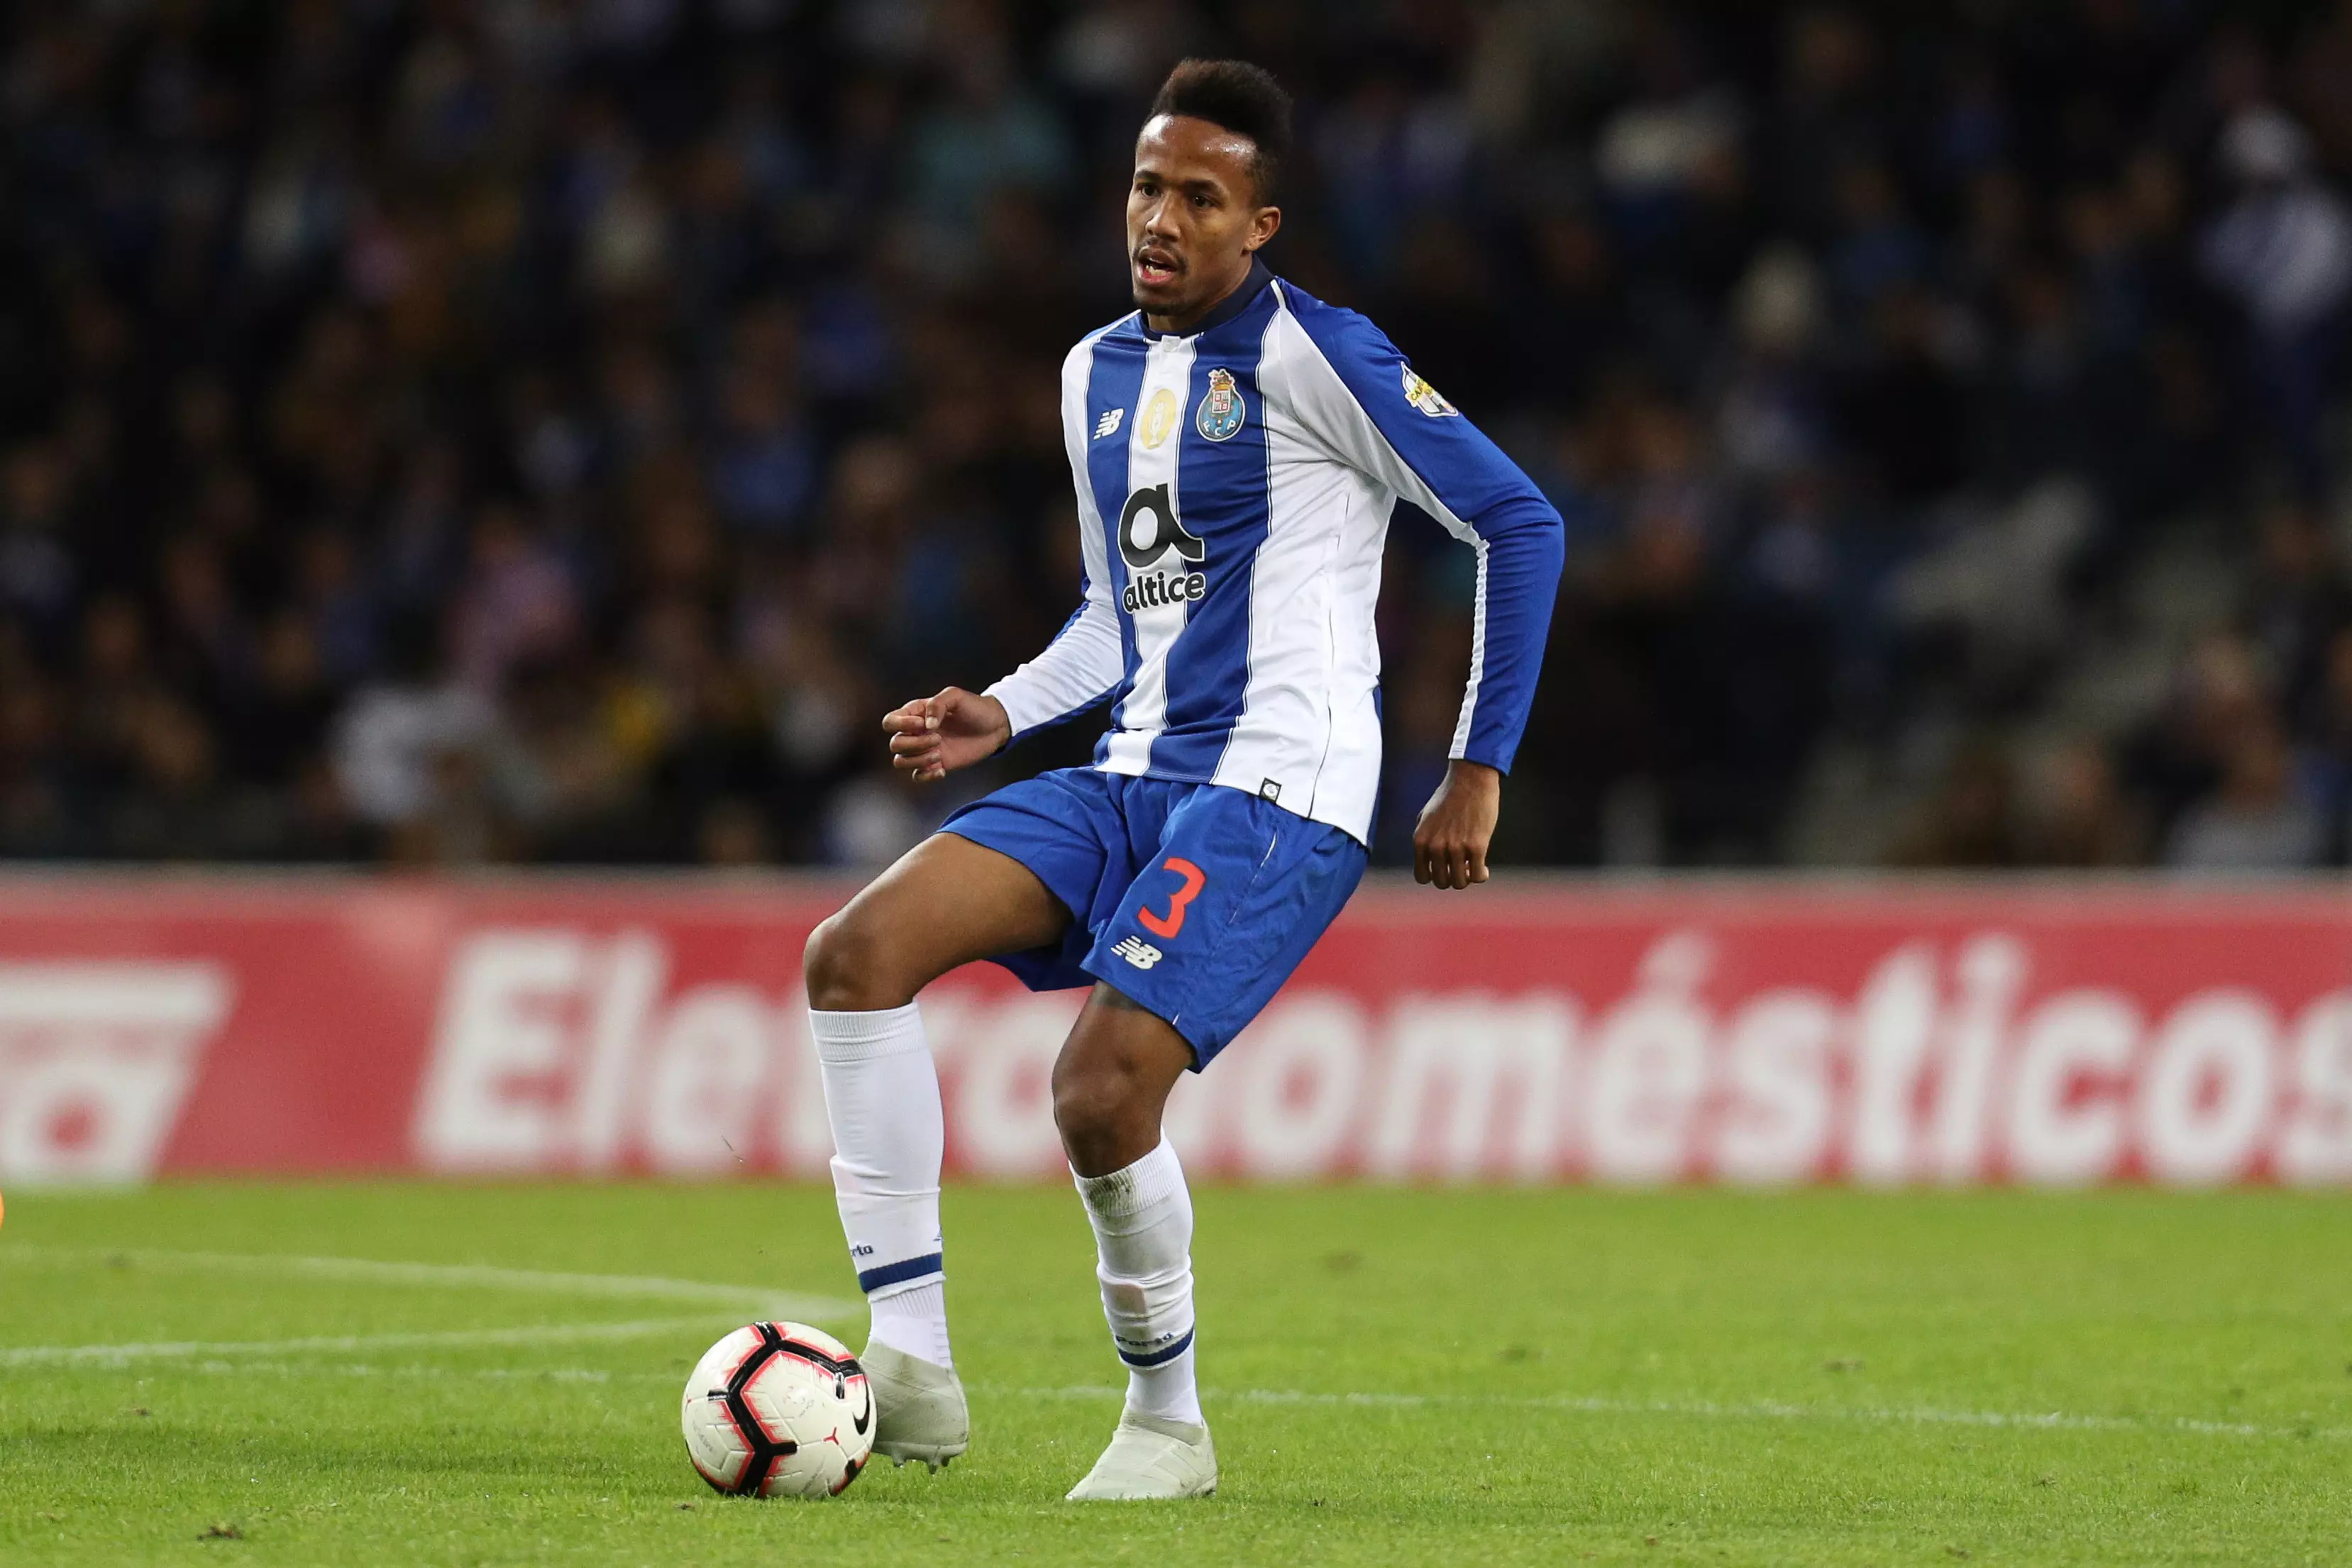 Militao has attracted a lot of interest. Image: PA Images